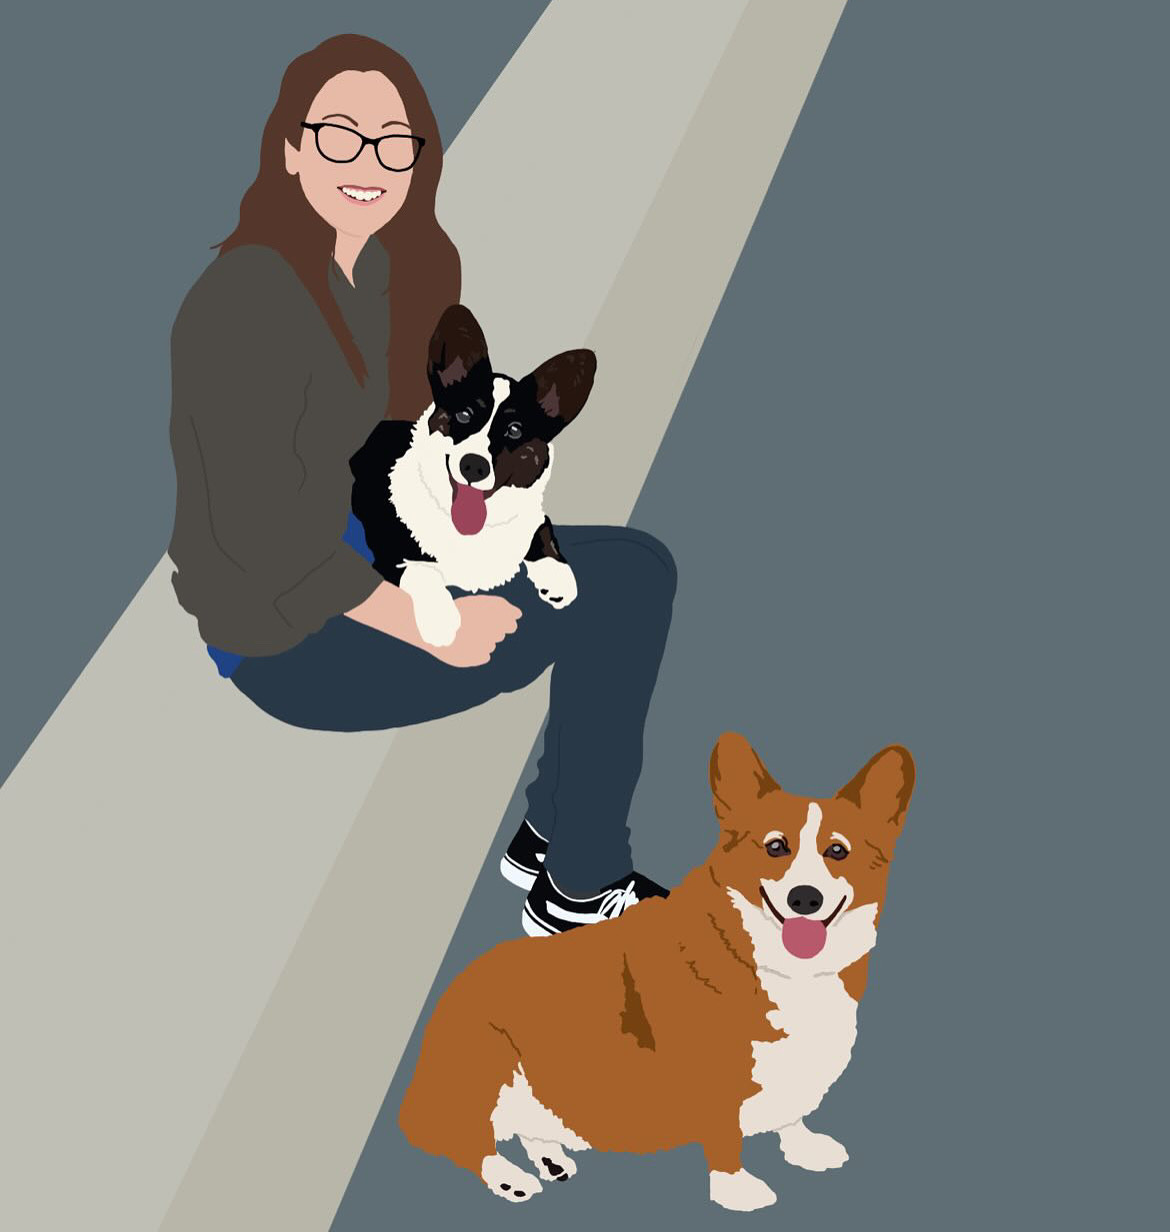 an illustration of Kendra, a brunette white woman with black glasses, Dylan, a read and white Pembroke Welsh Corgi, and Gwen, a black and white cardigan Welsh Corgi